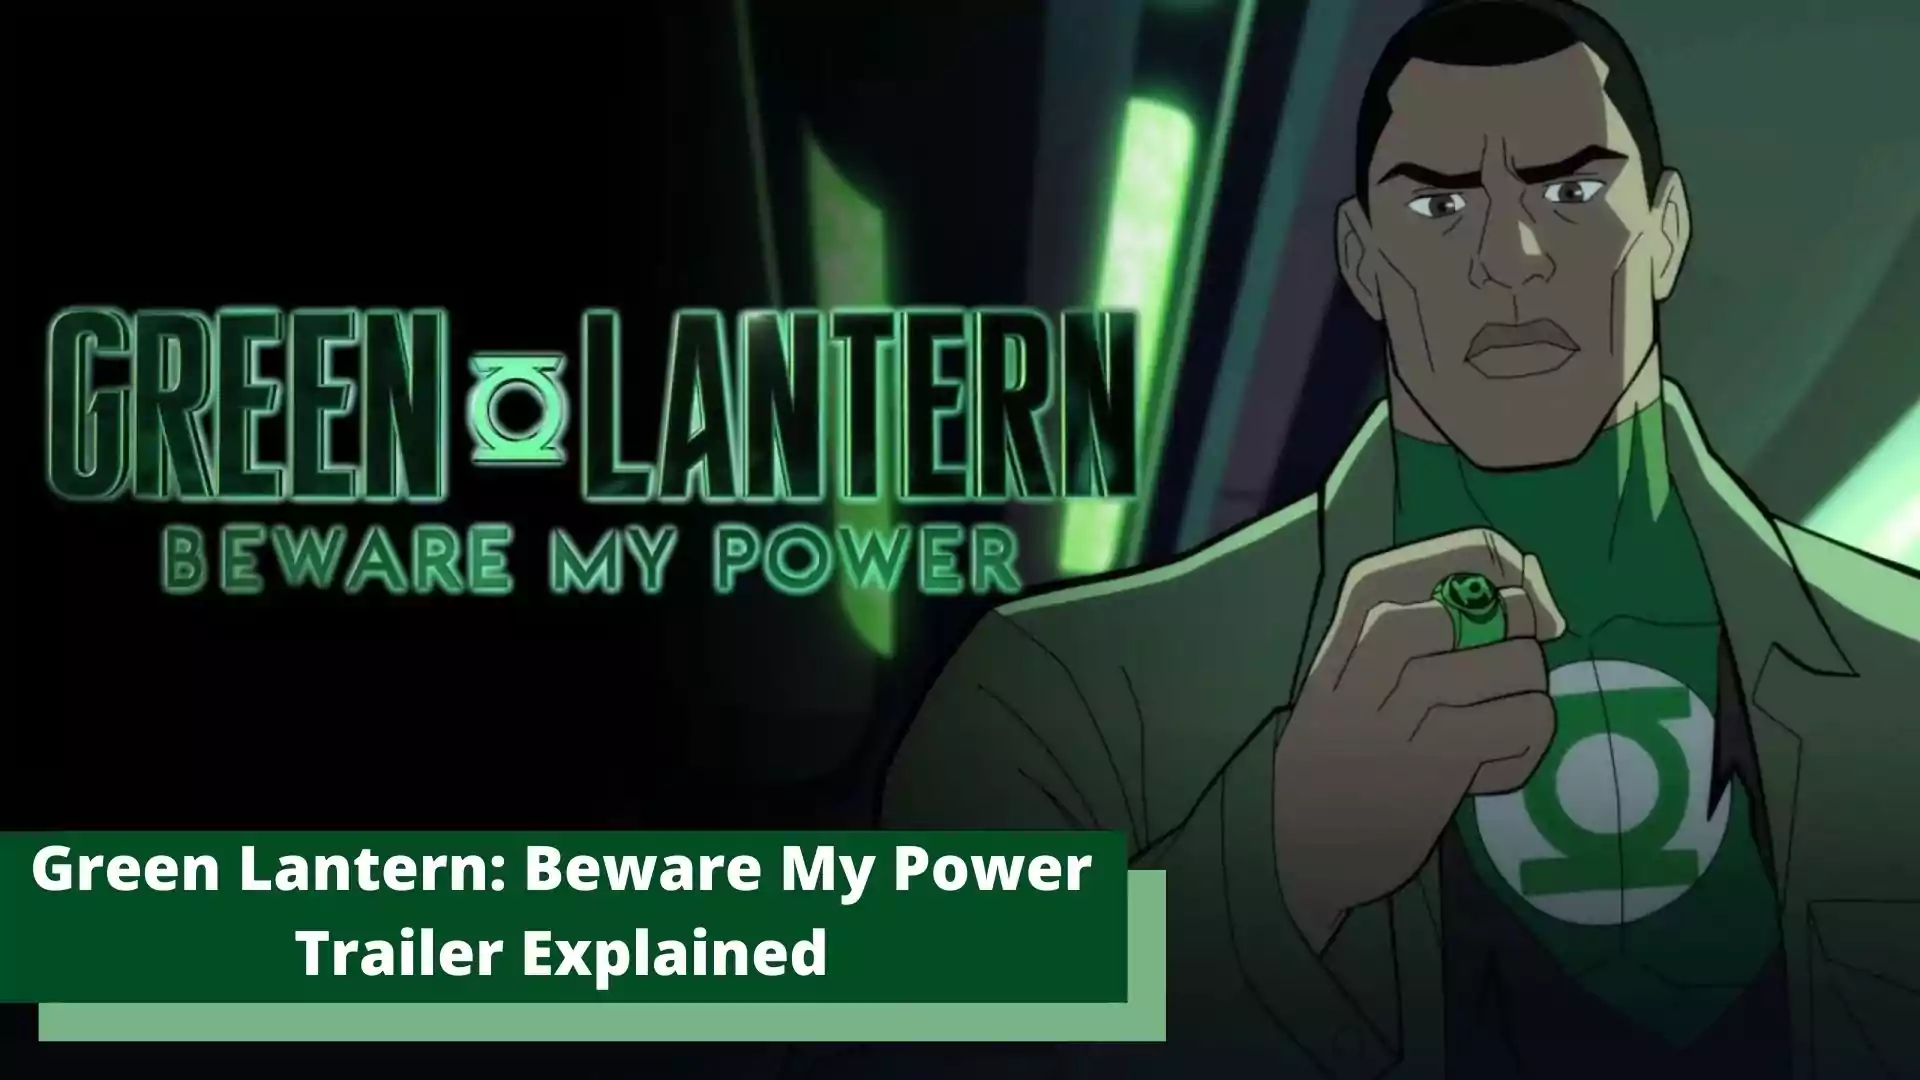 Green Lantern: Beware My Power Trailer Explained. 'Green Lantern: Beware My Power' Trailer is out. Here is the details of the upcoming DC film Green Lantern.